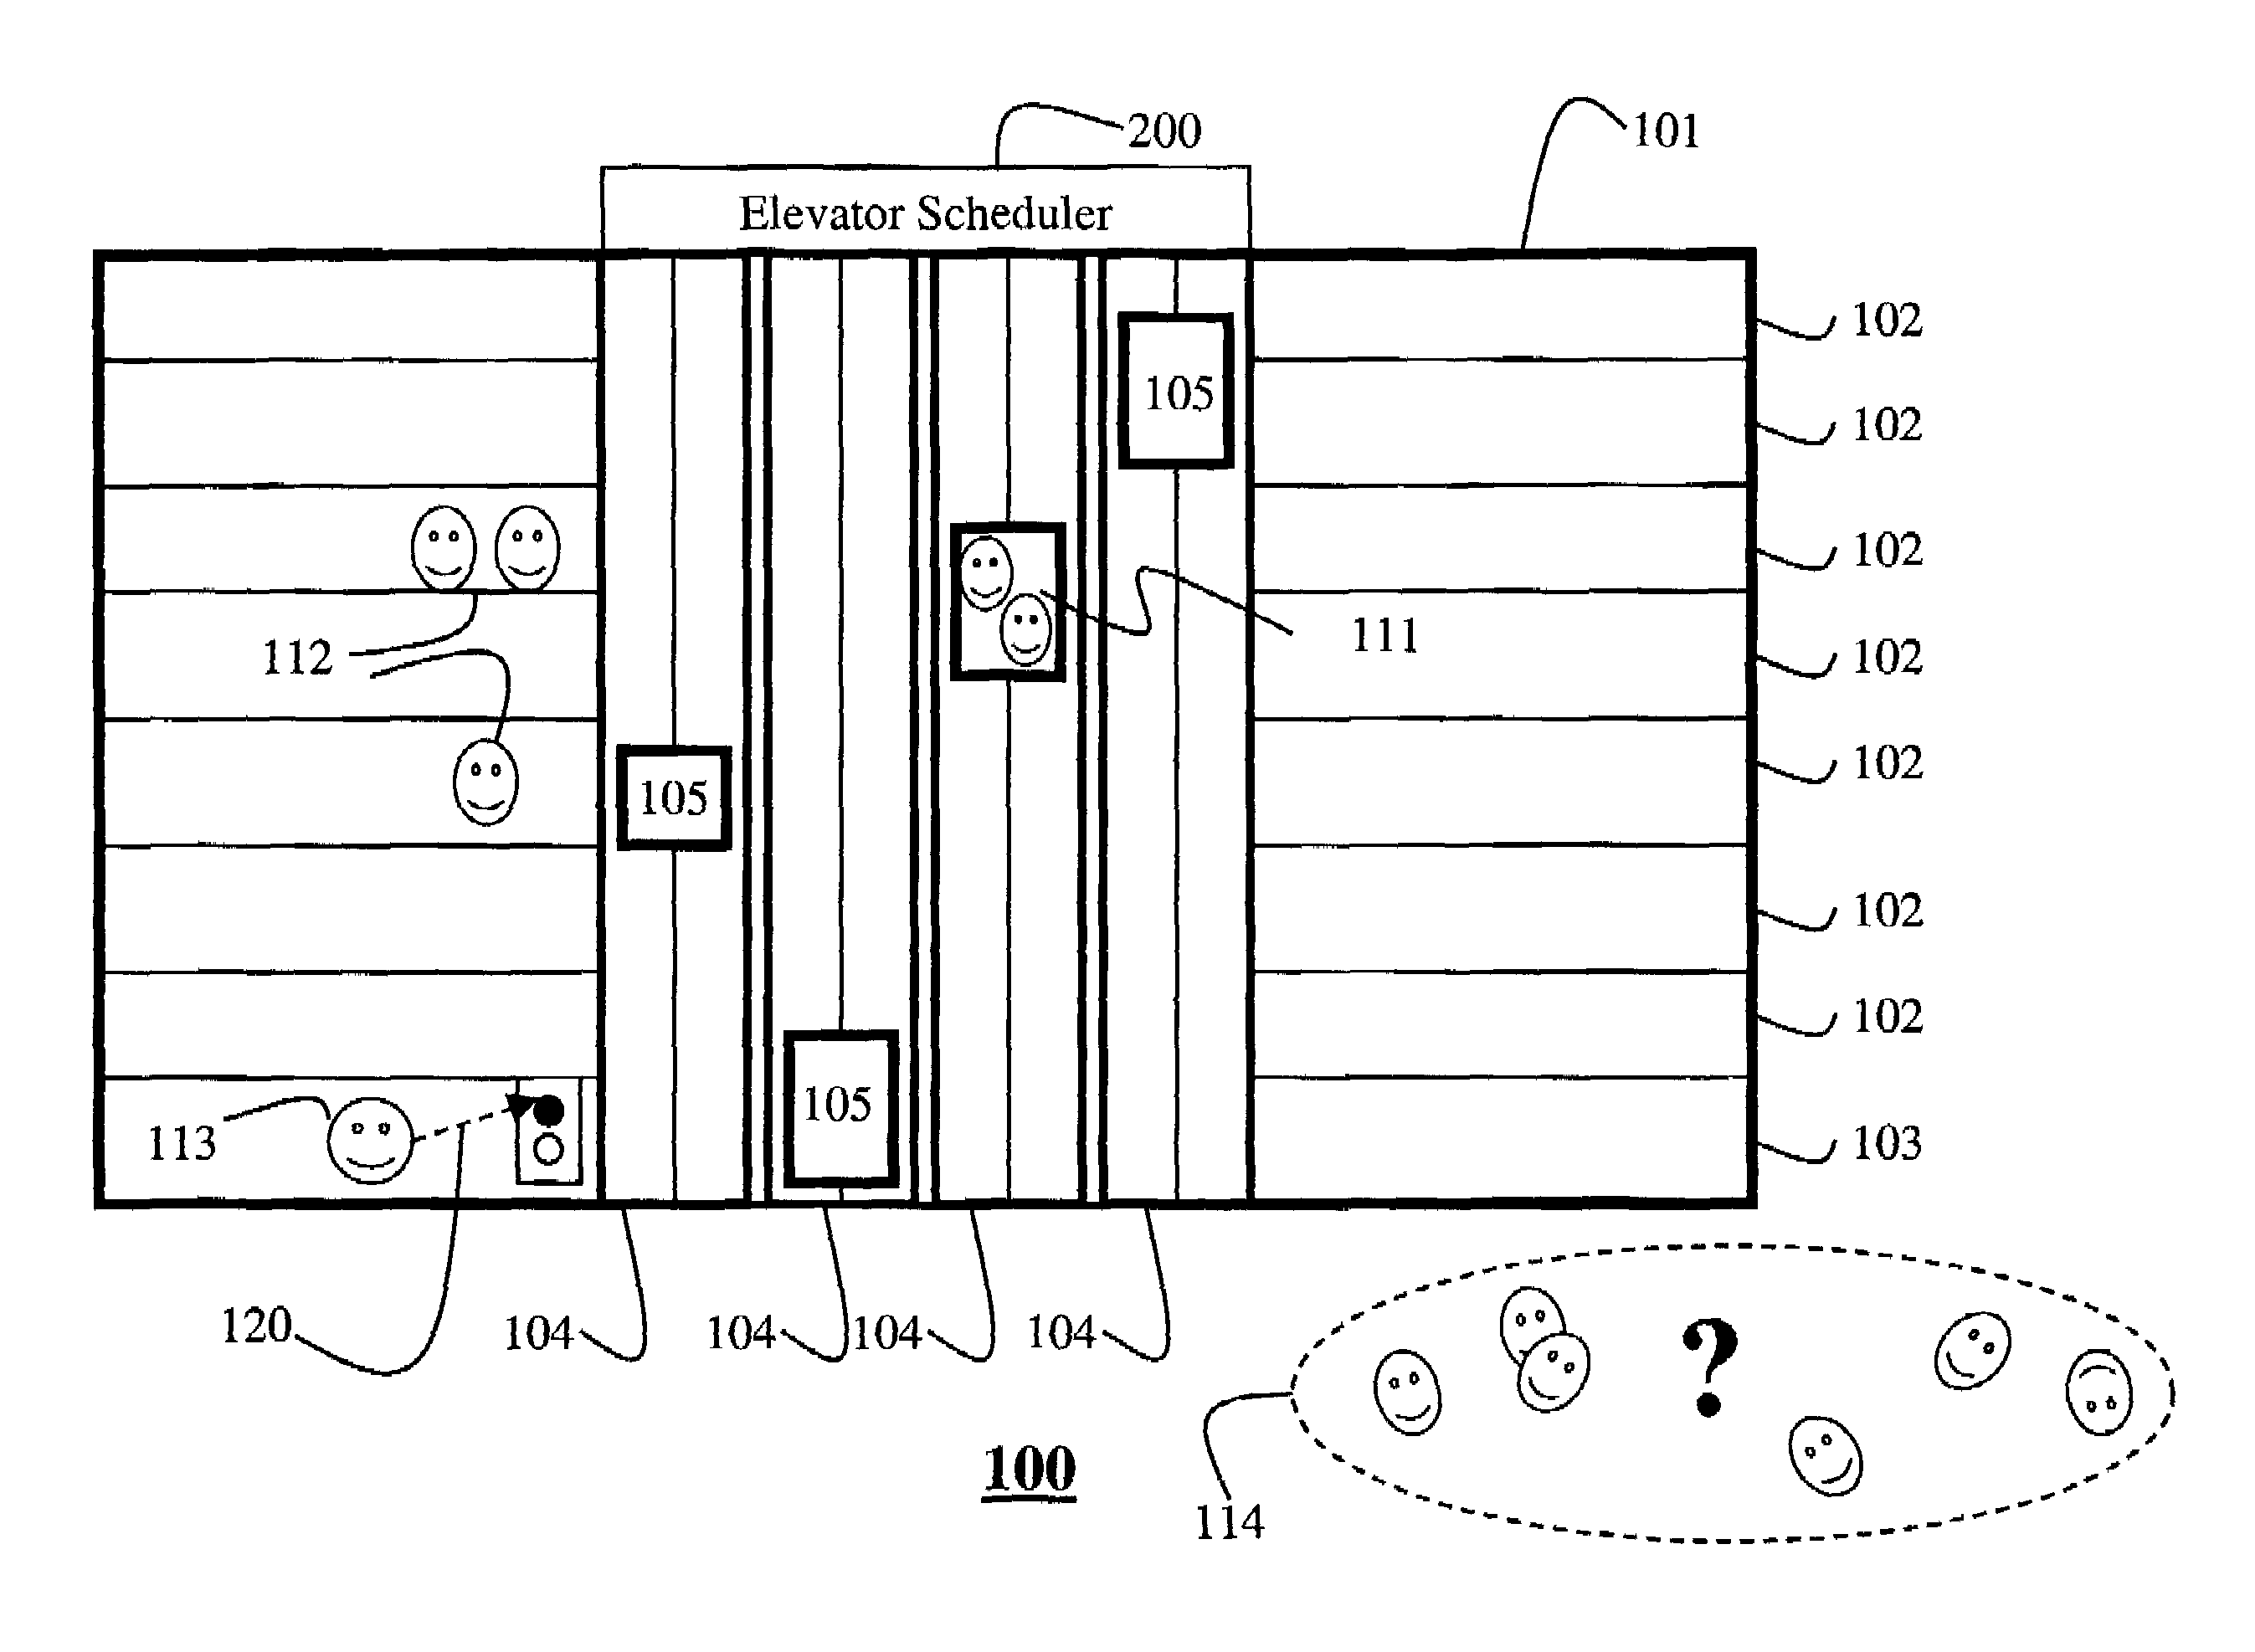 Method and system for scheduling cars in elevator systems considering existing and future passengers